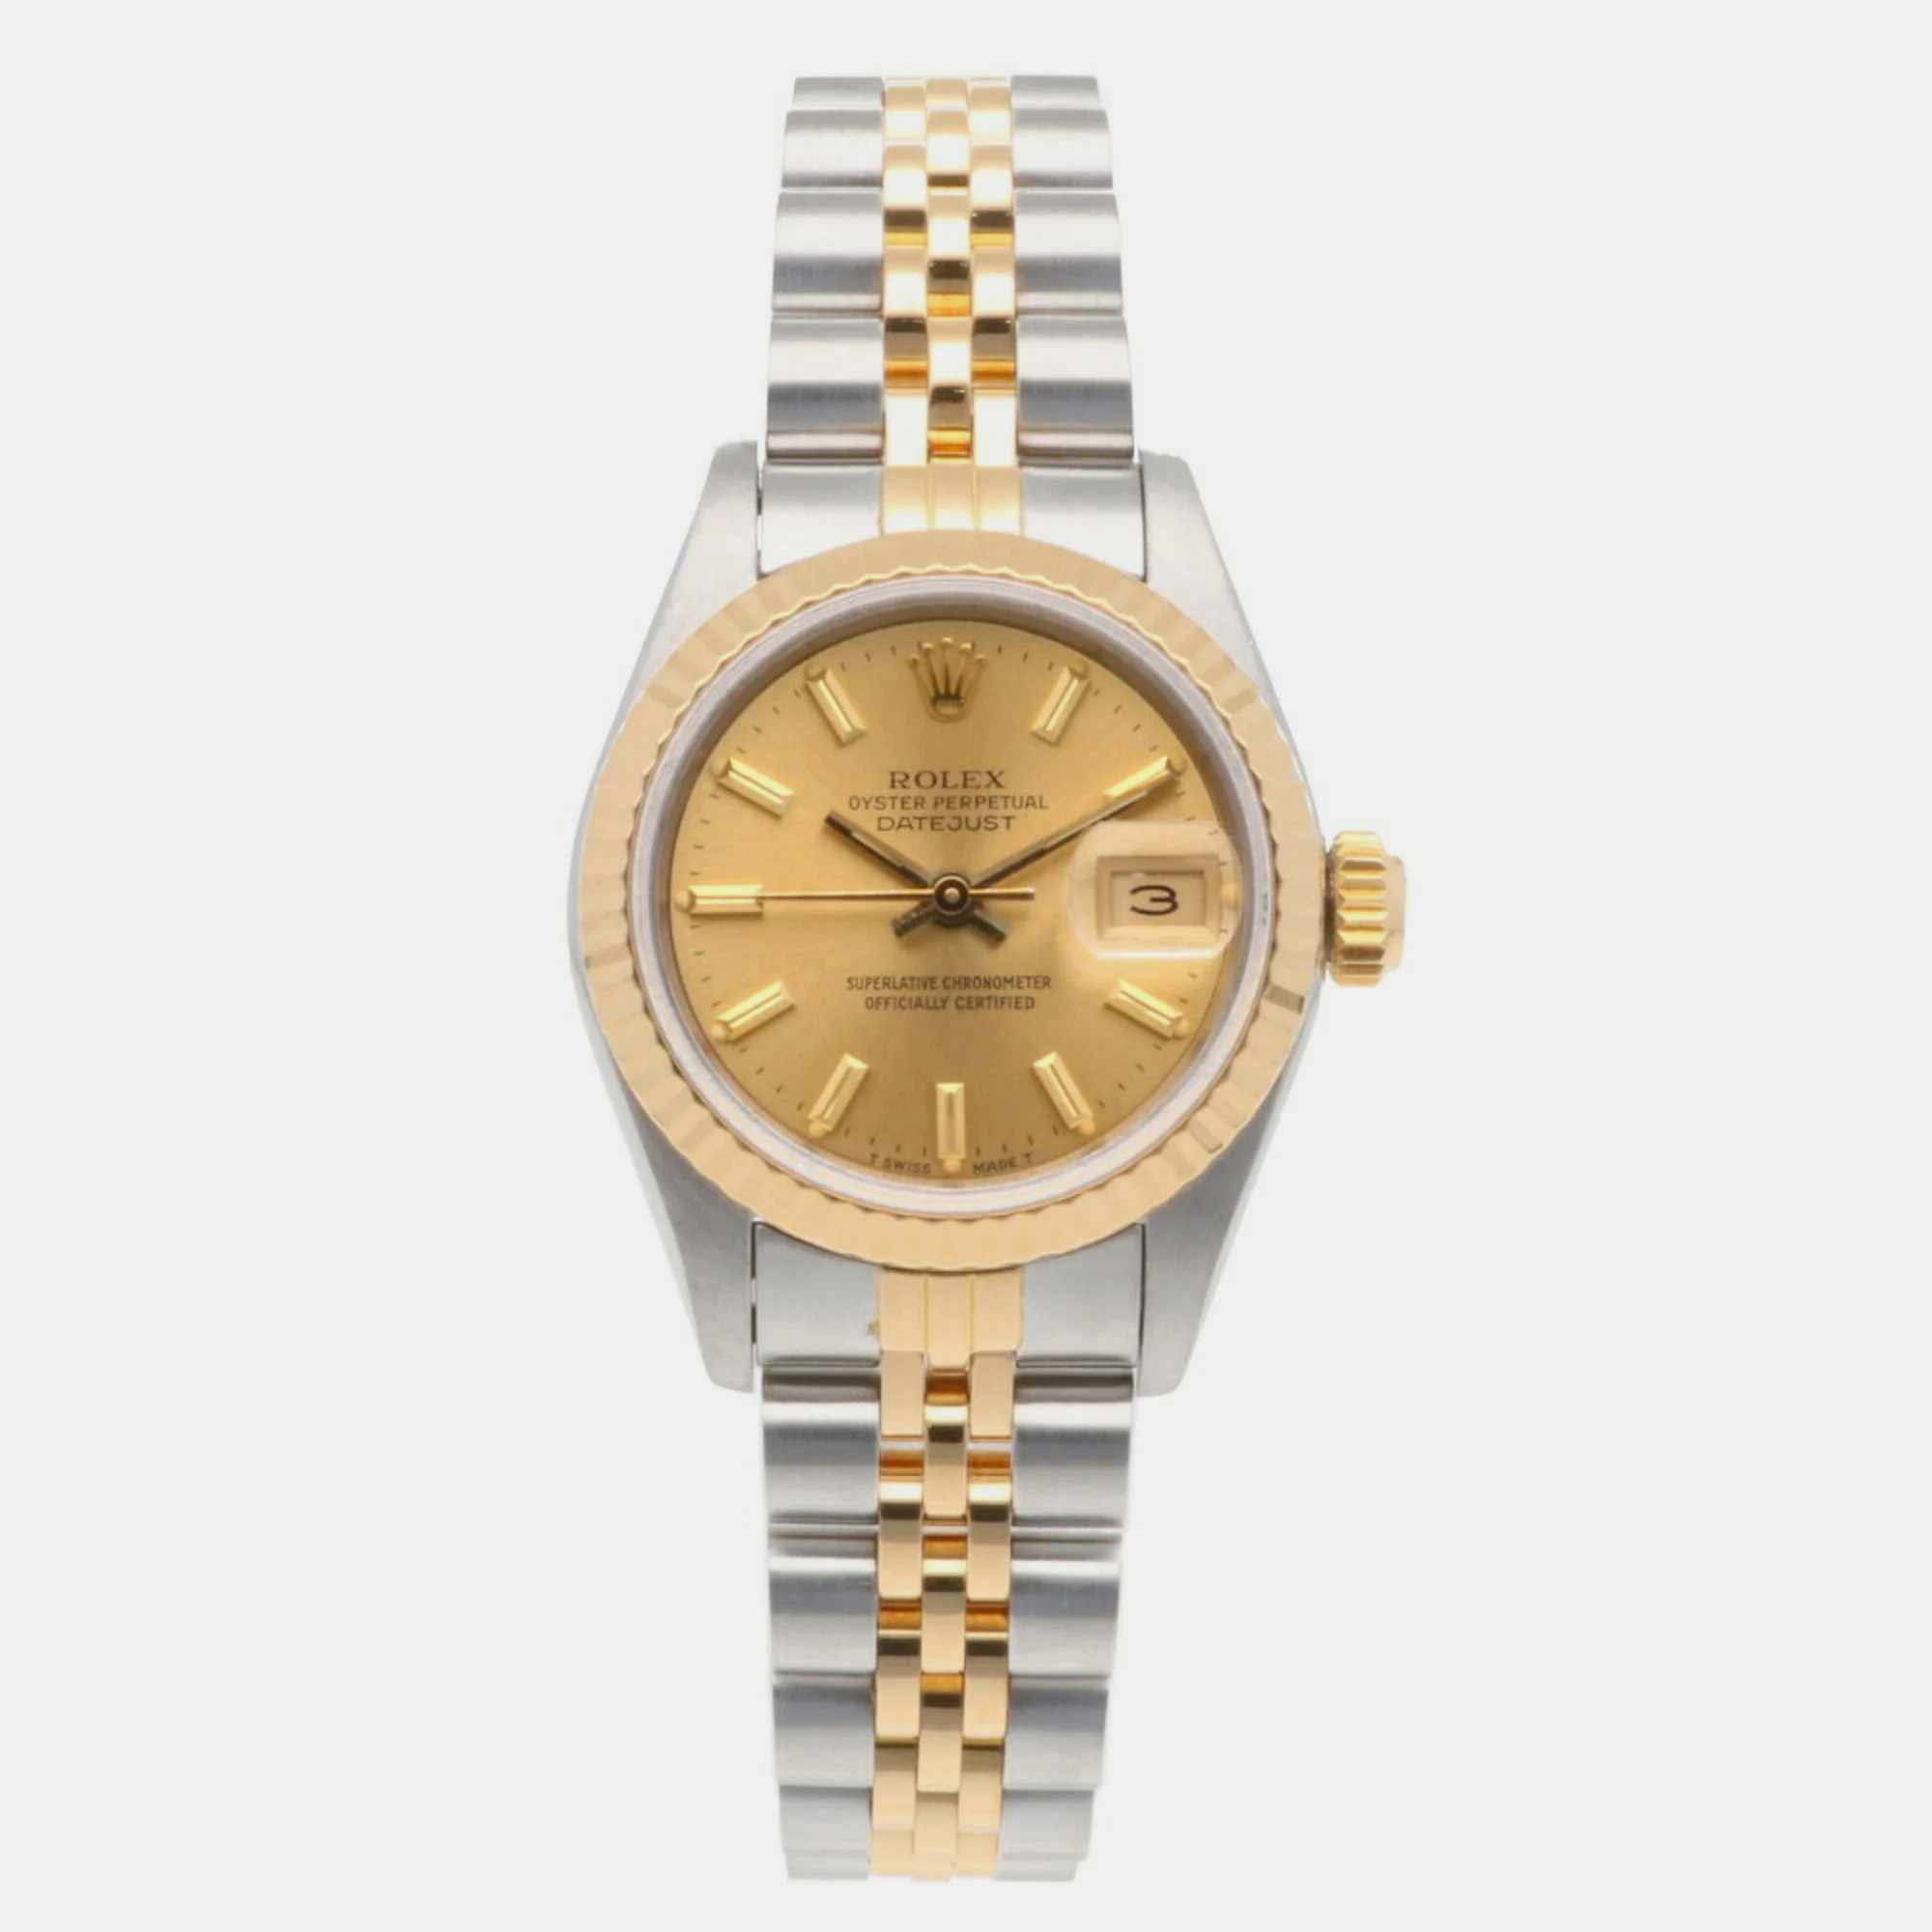 Rolex champagne 18k yellow gold stainless steel datejust 69173 automatic women's wristwatch 26 mm